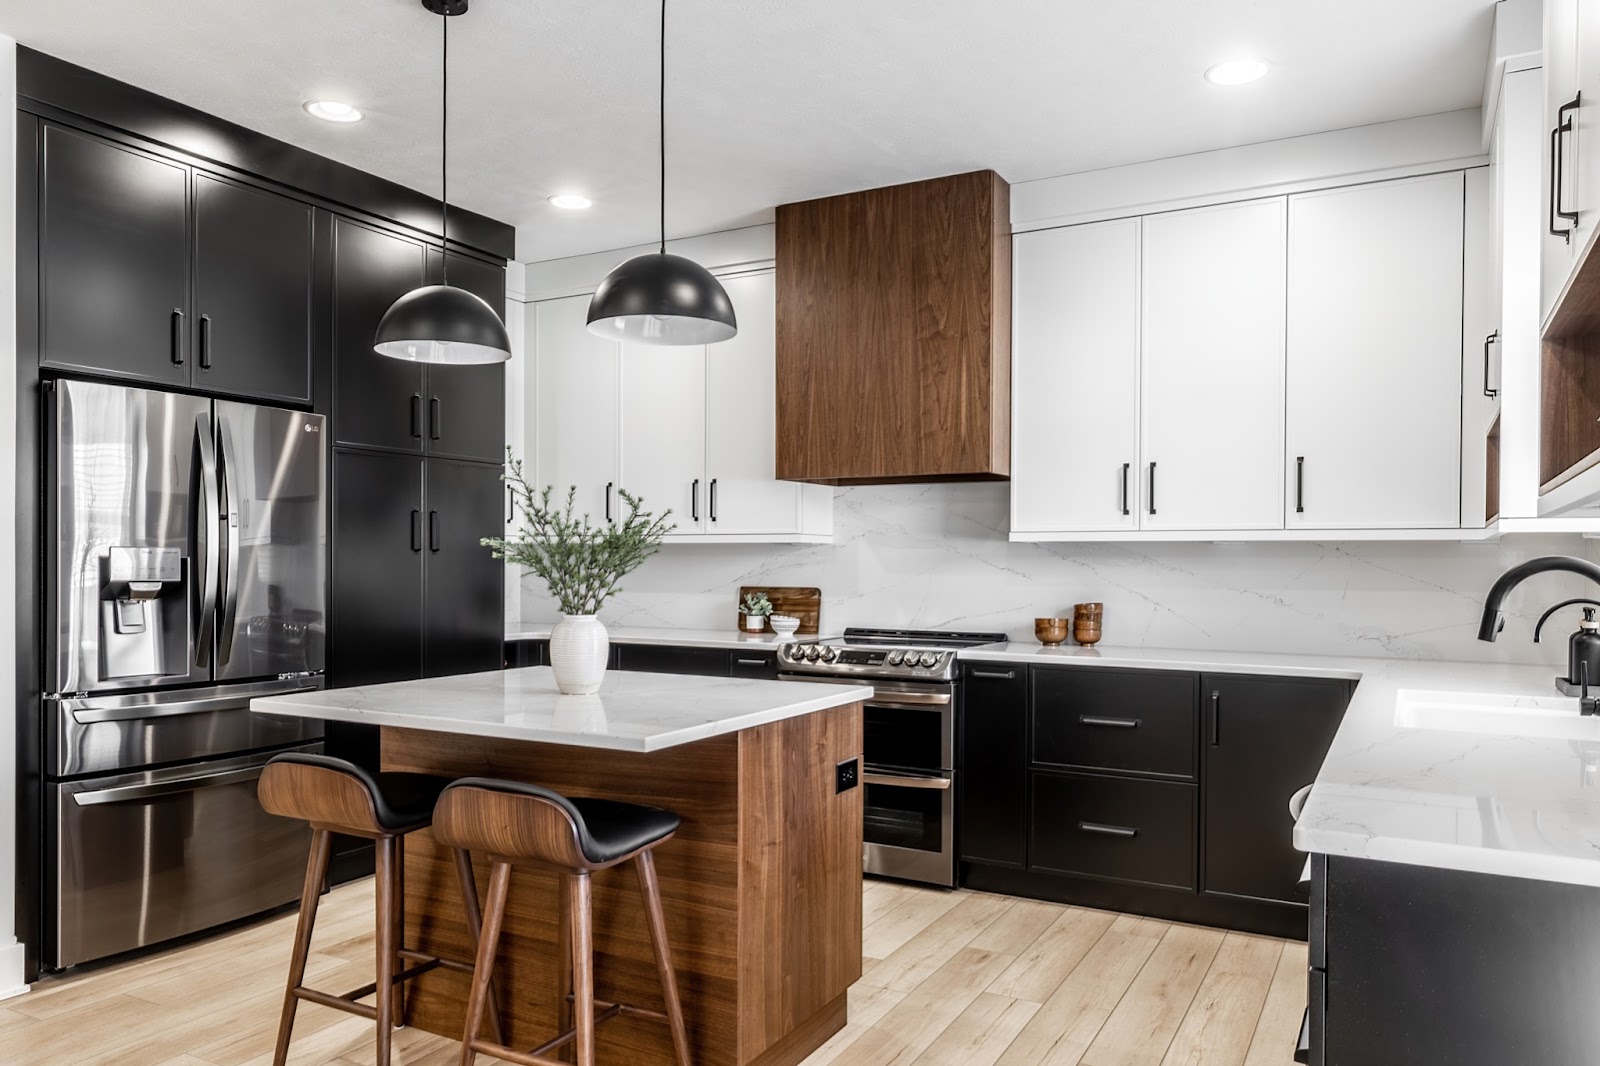 Mid-century modern kitchen design featuring neutral black and white modern cabinetry with rich wood and leather accents